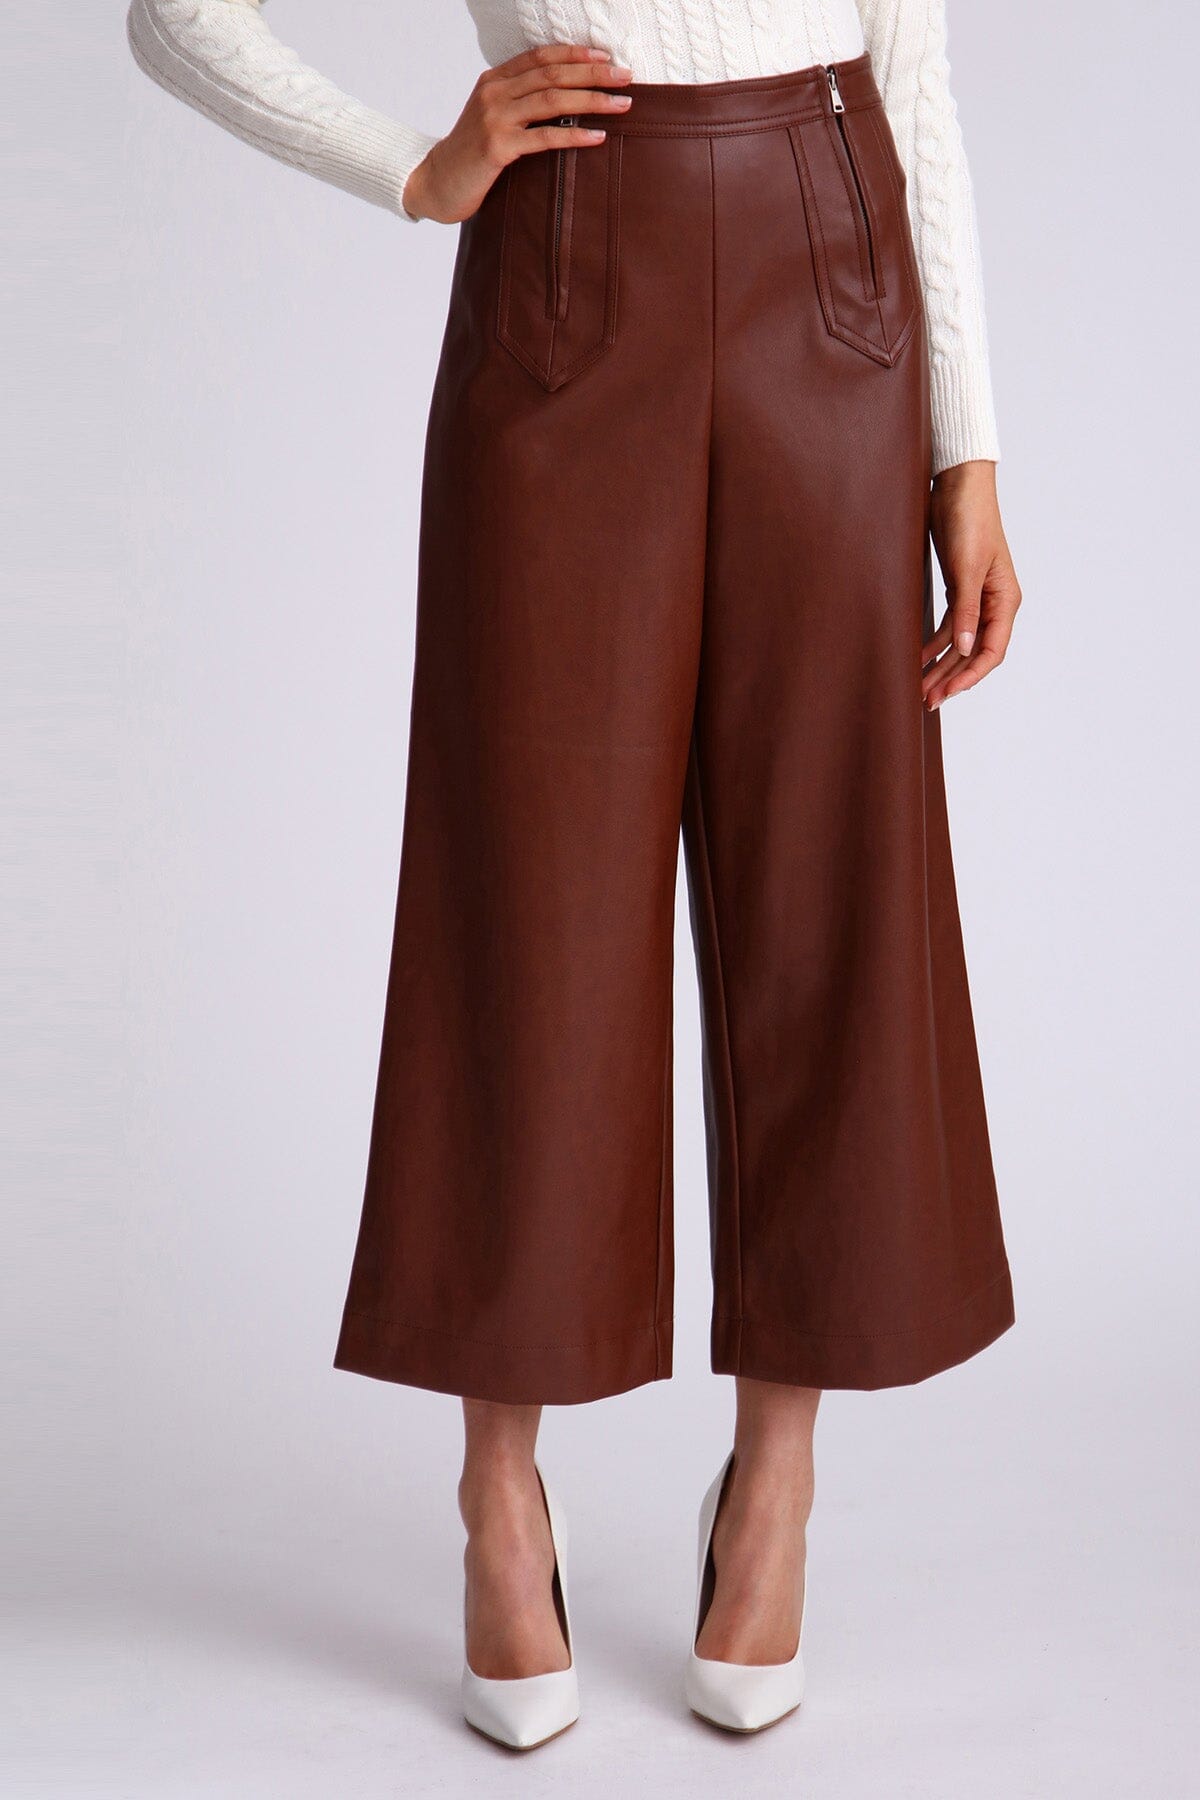 Cognac brown double zip faux leather cropped culotte pant - women's figure flattering office to date night high waist pants for fall 2023